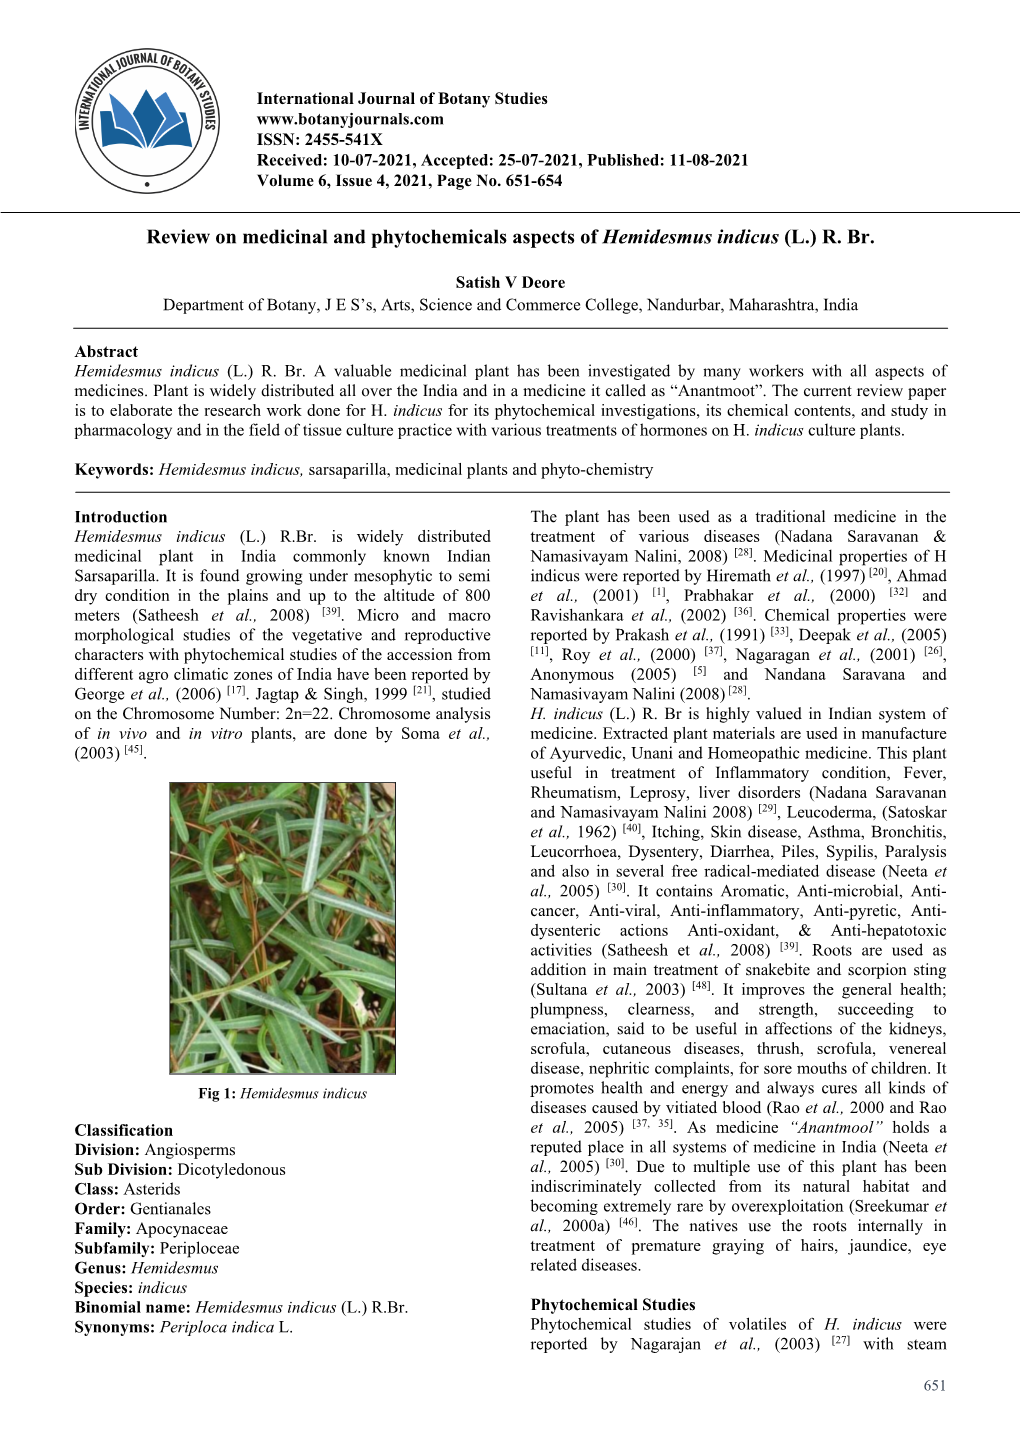 Review on Medicinal and Phytochemicals Aspects of Hemidesmus Indicus (L.) R